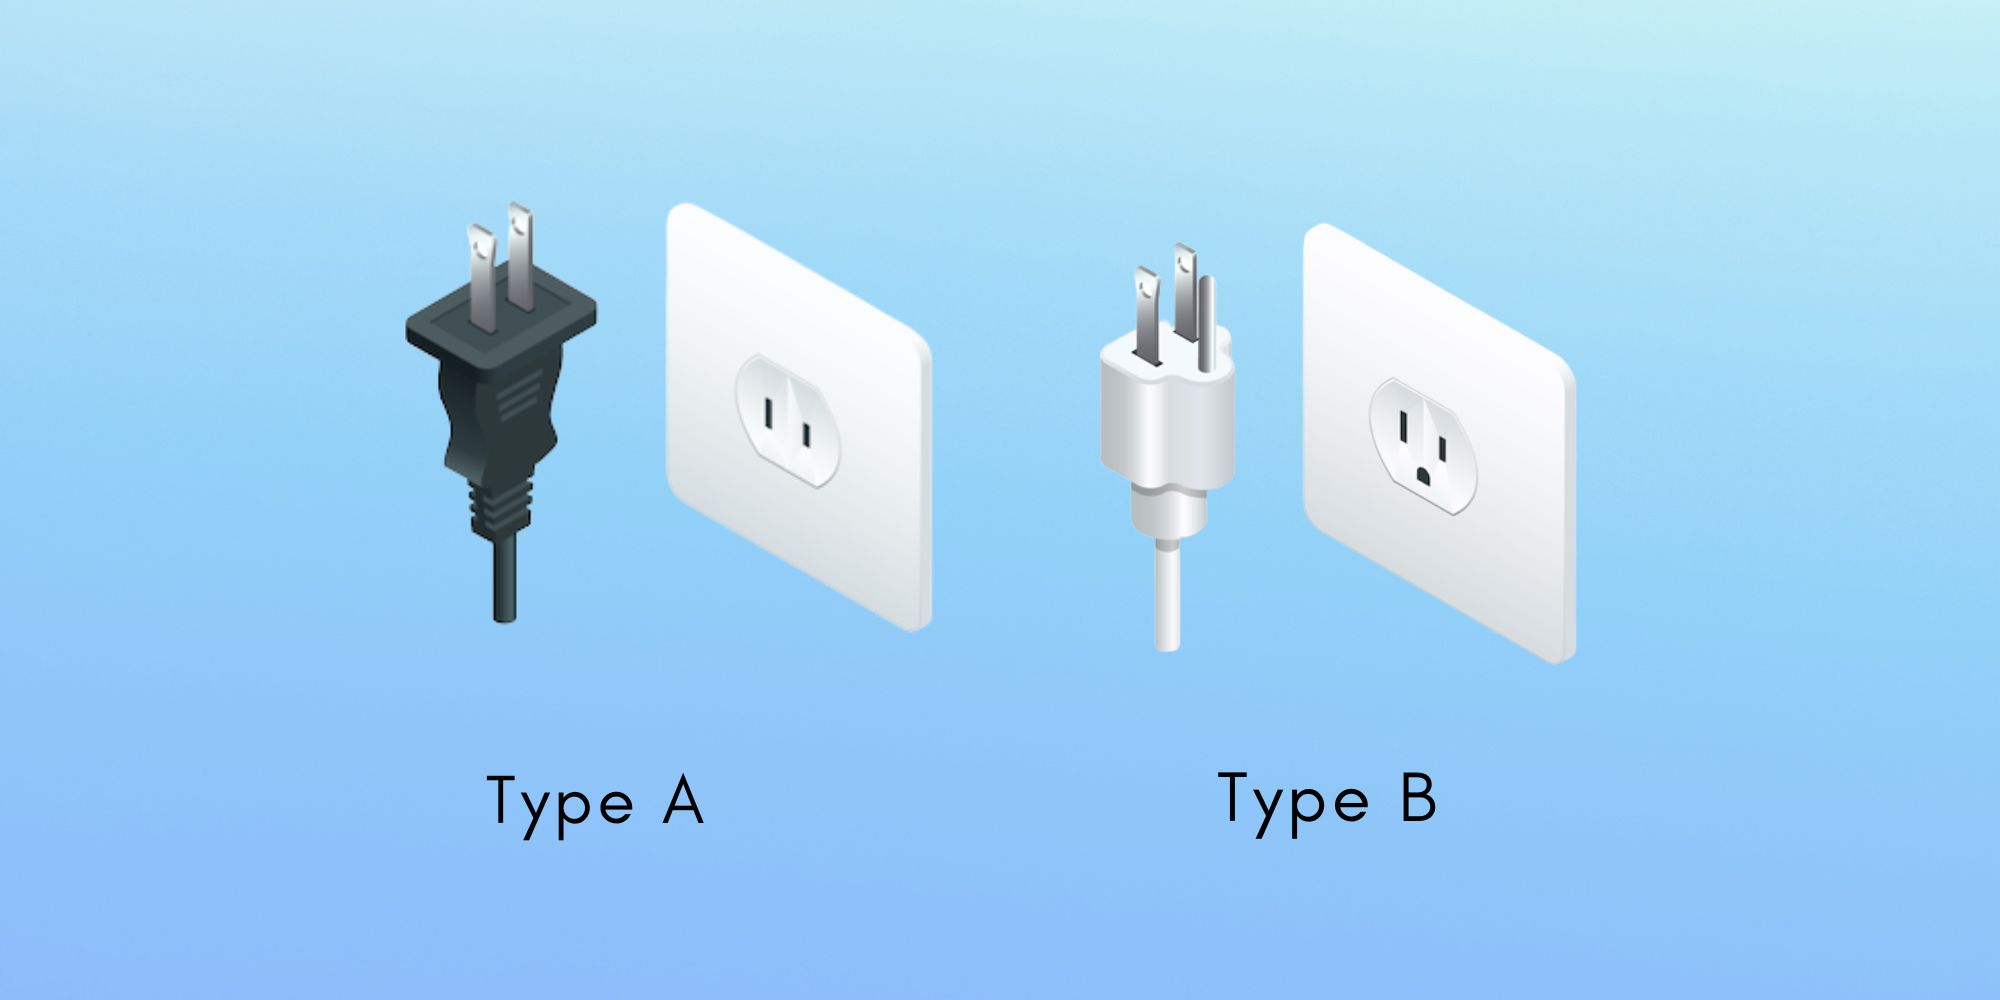 United States Power Plugs and Sockets: Type A and Type B
